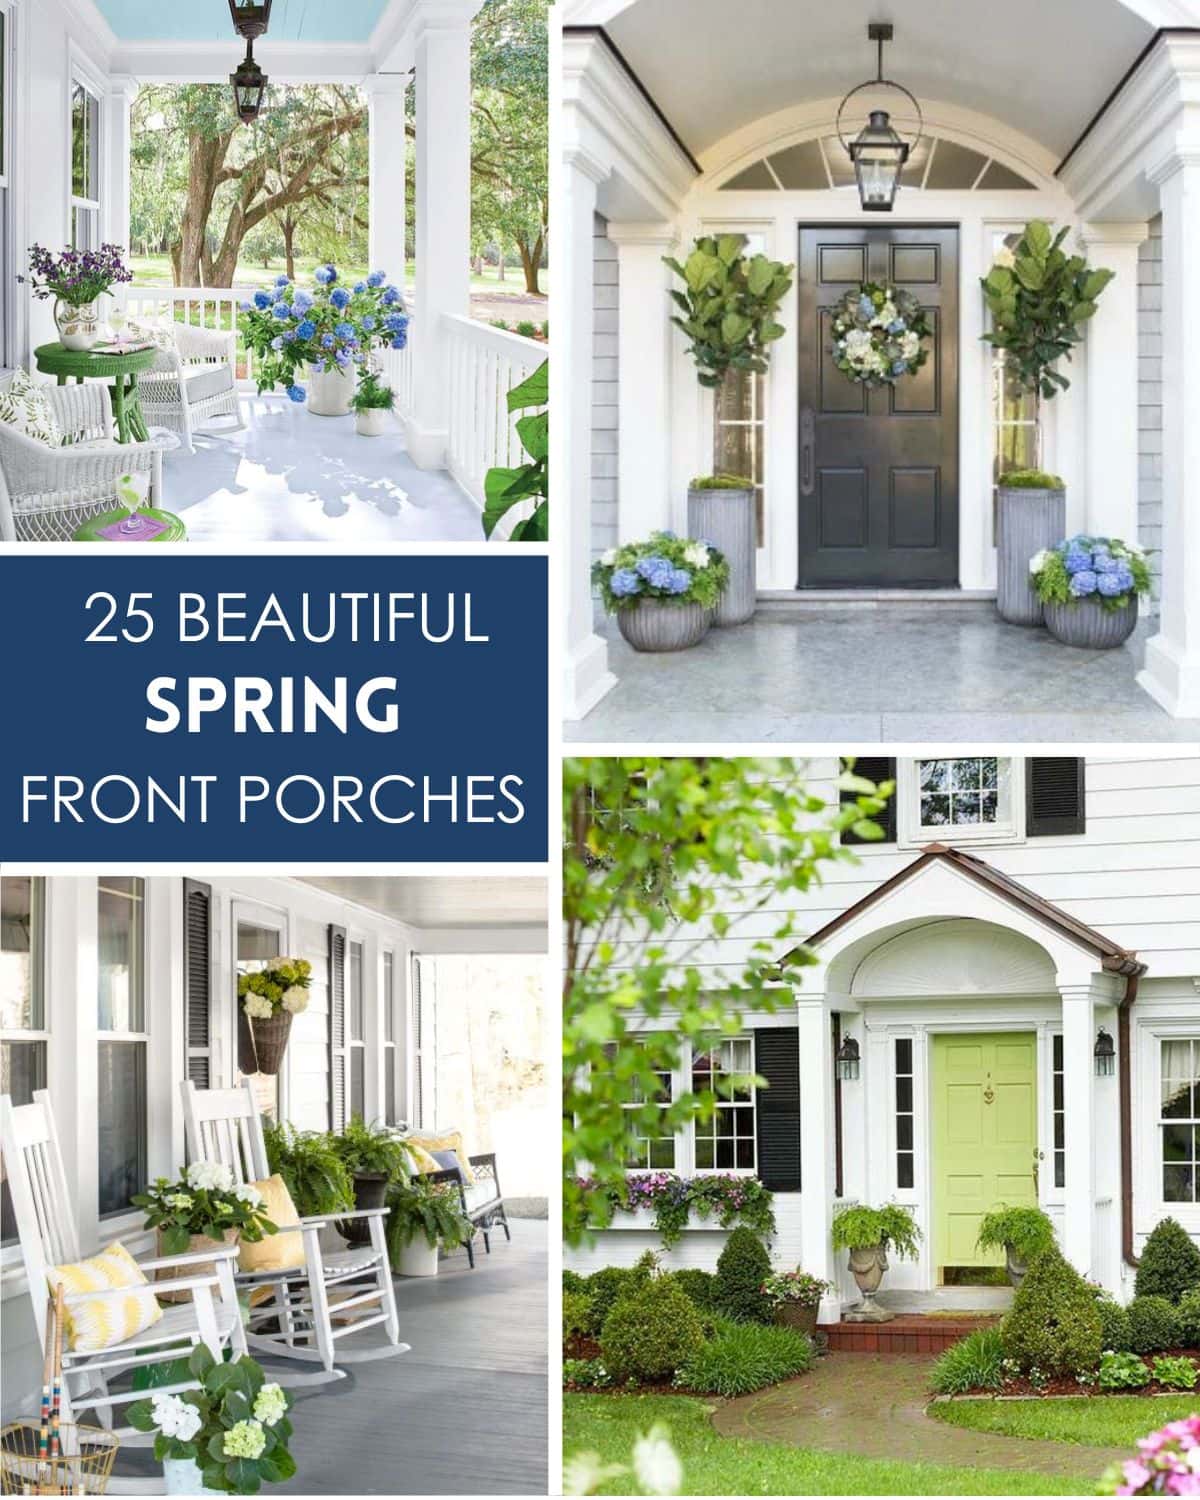 A variety of spring front porches with lots of color, plants, flowers, and cozy chairs. 